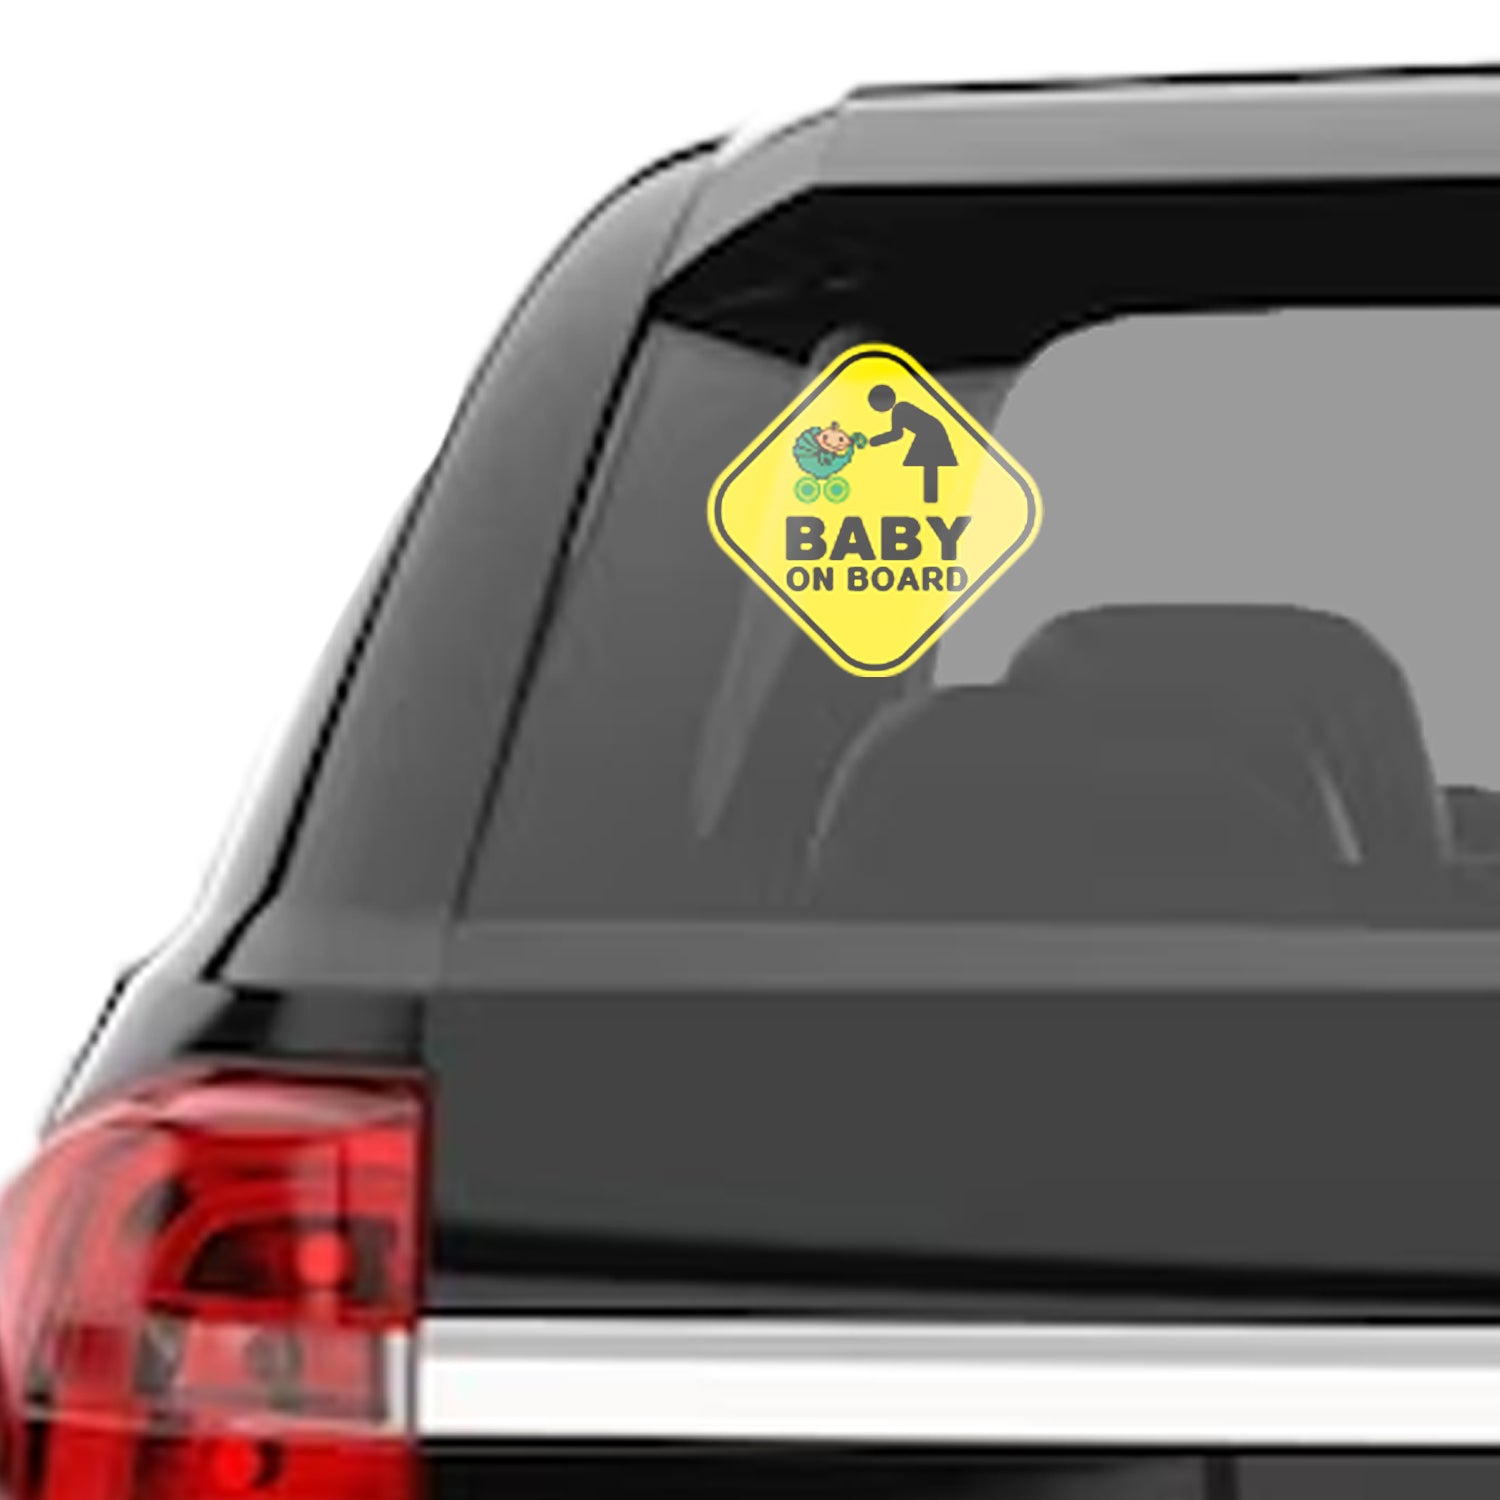 Baby Moo Car Safety Sign Baby On Board With Vacuum Suction Cup Clip - Yellow - Baby Moo